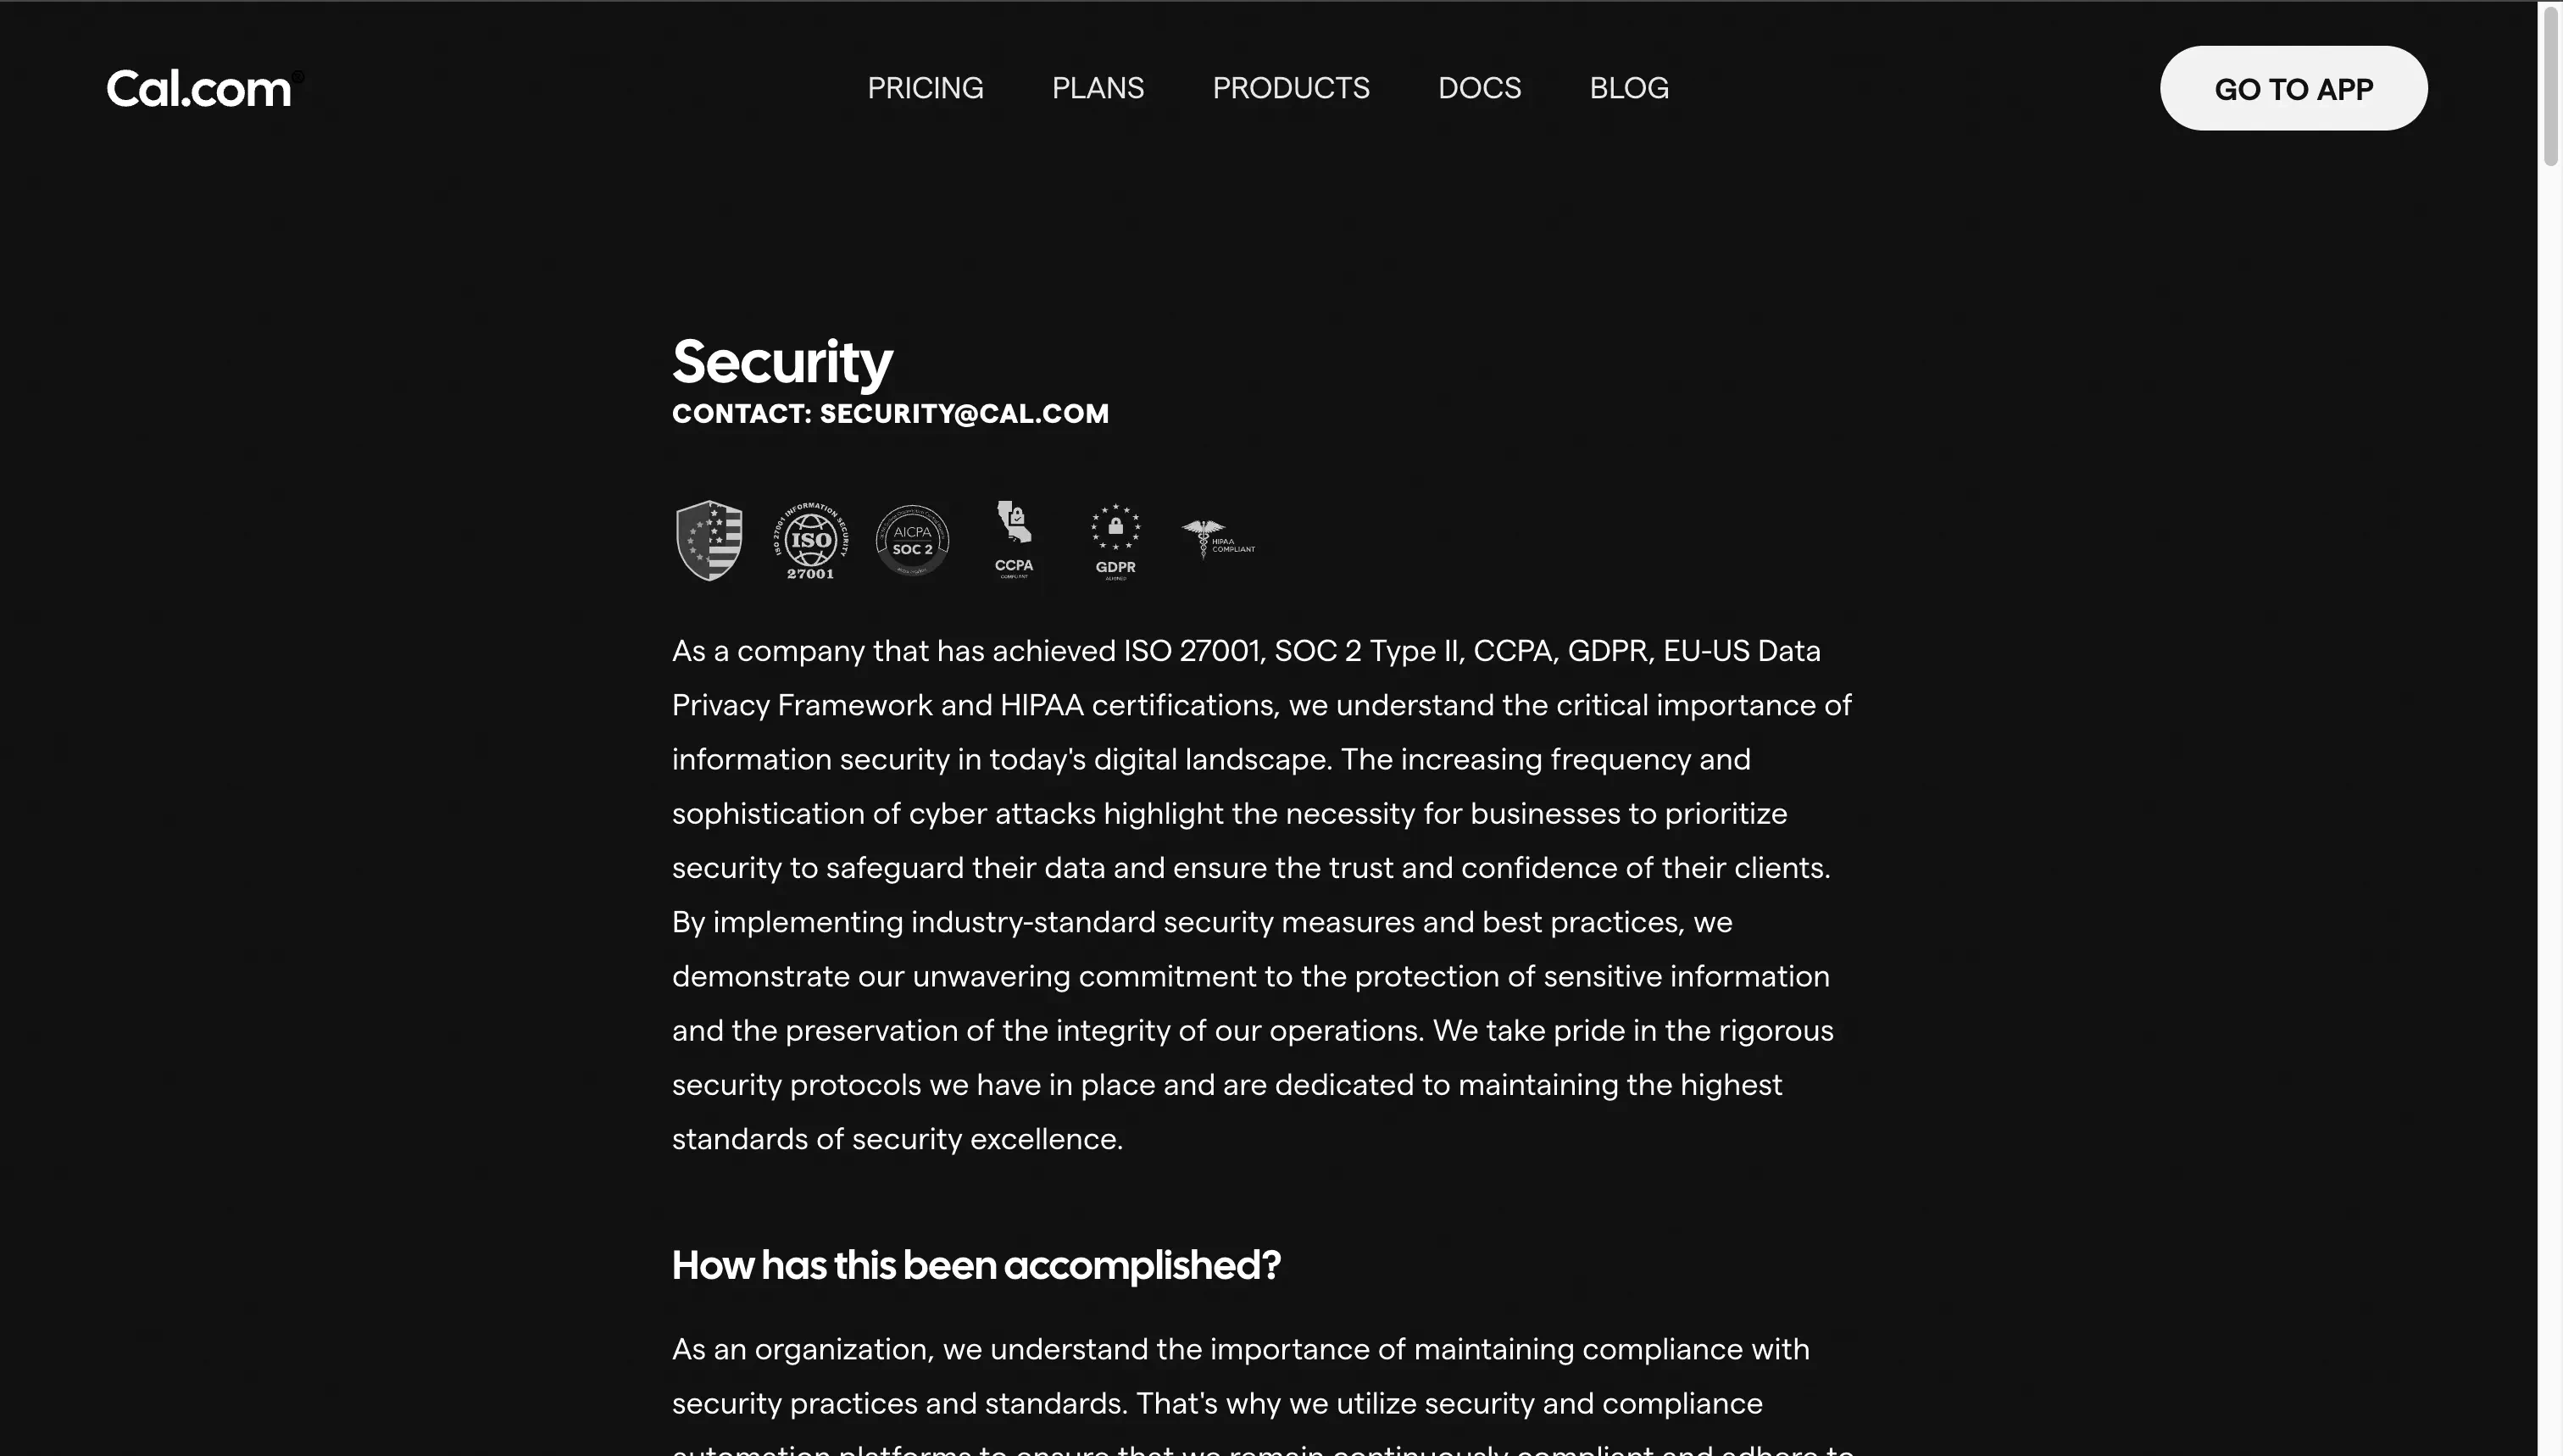 Screenshot from the Cal.com security page